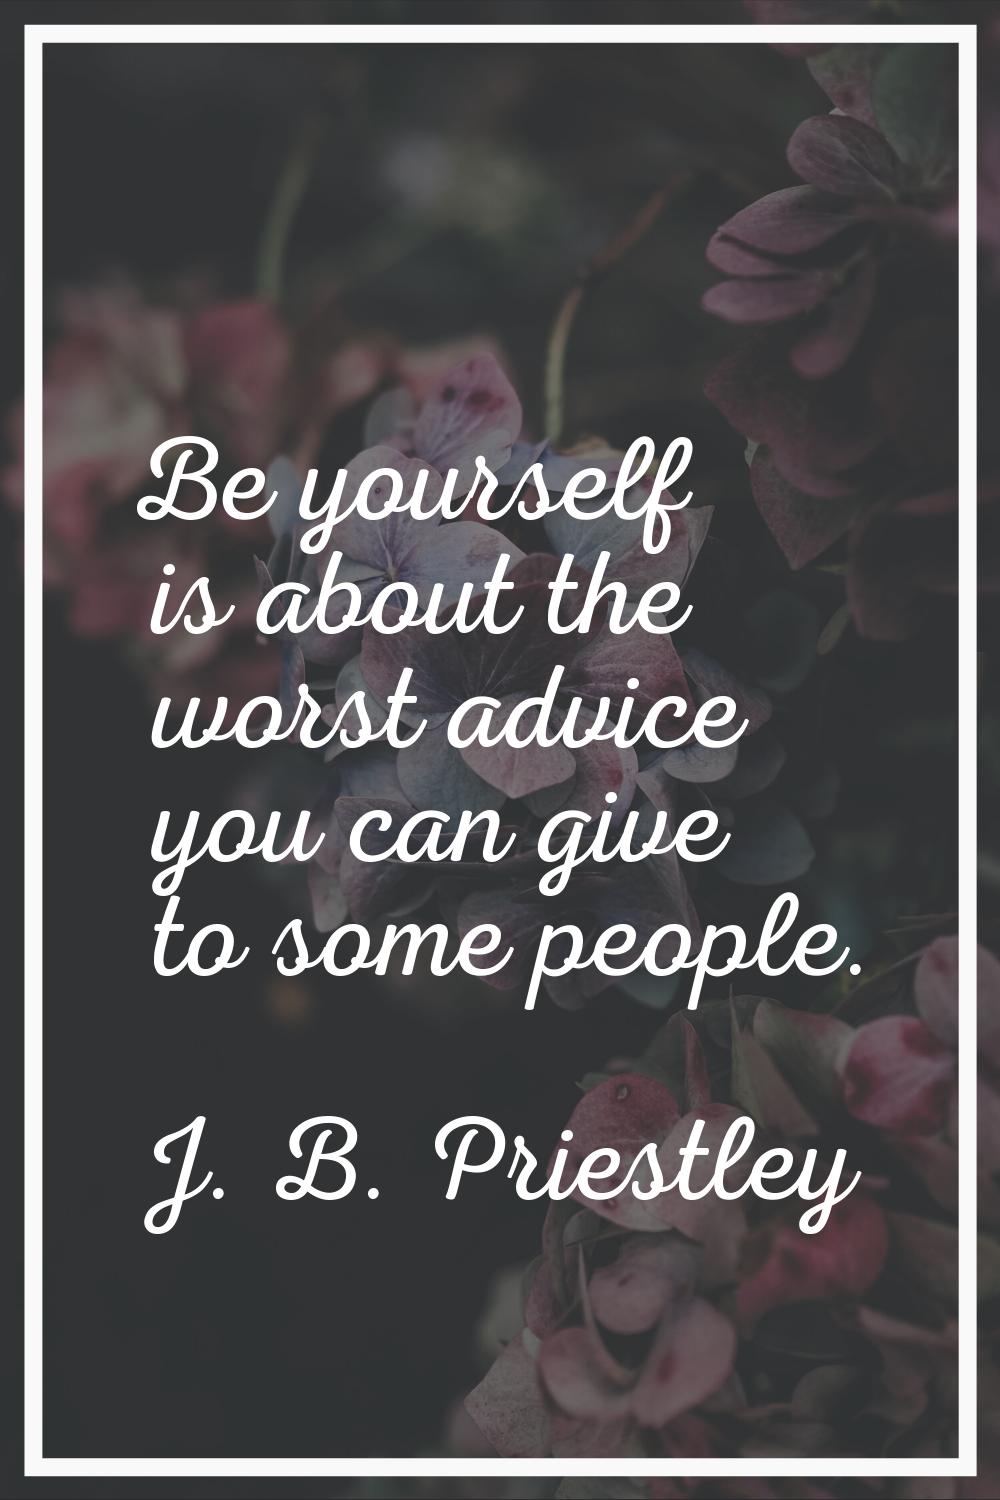 Be yourself is about the worst advice you can give to some people.